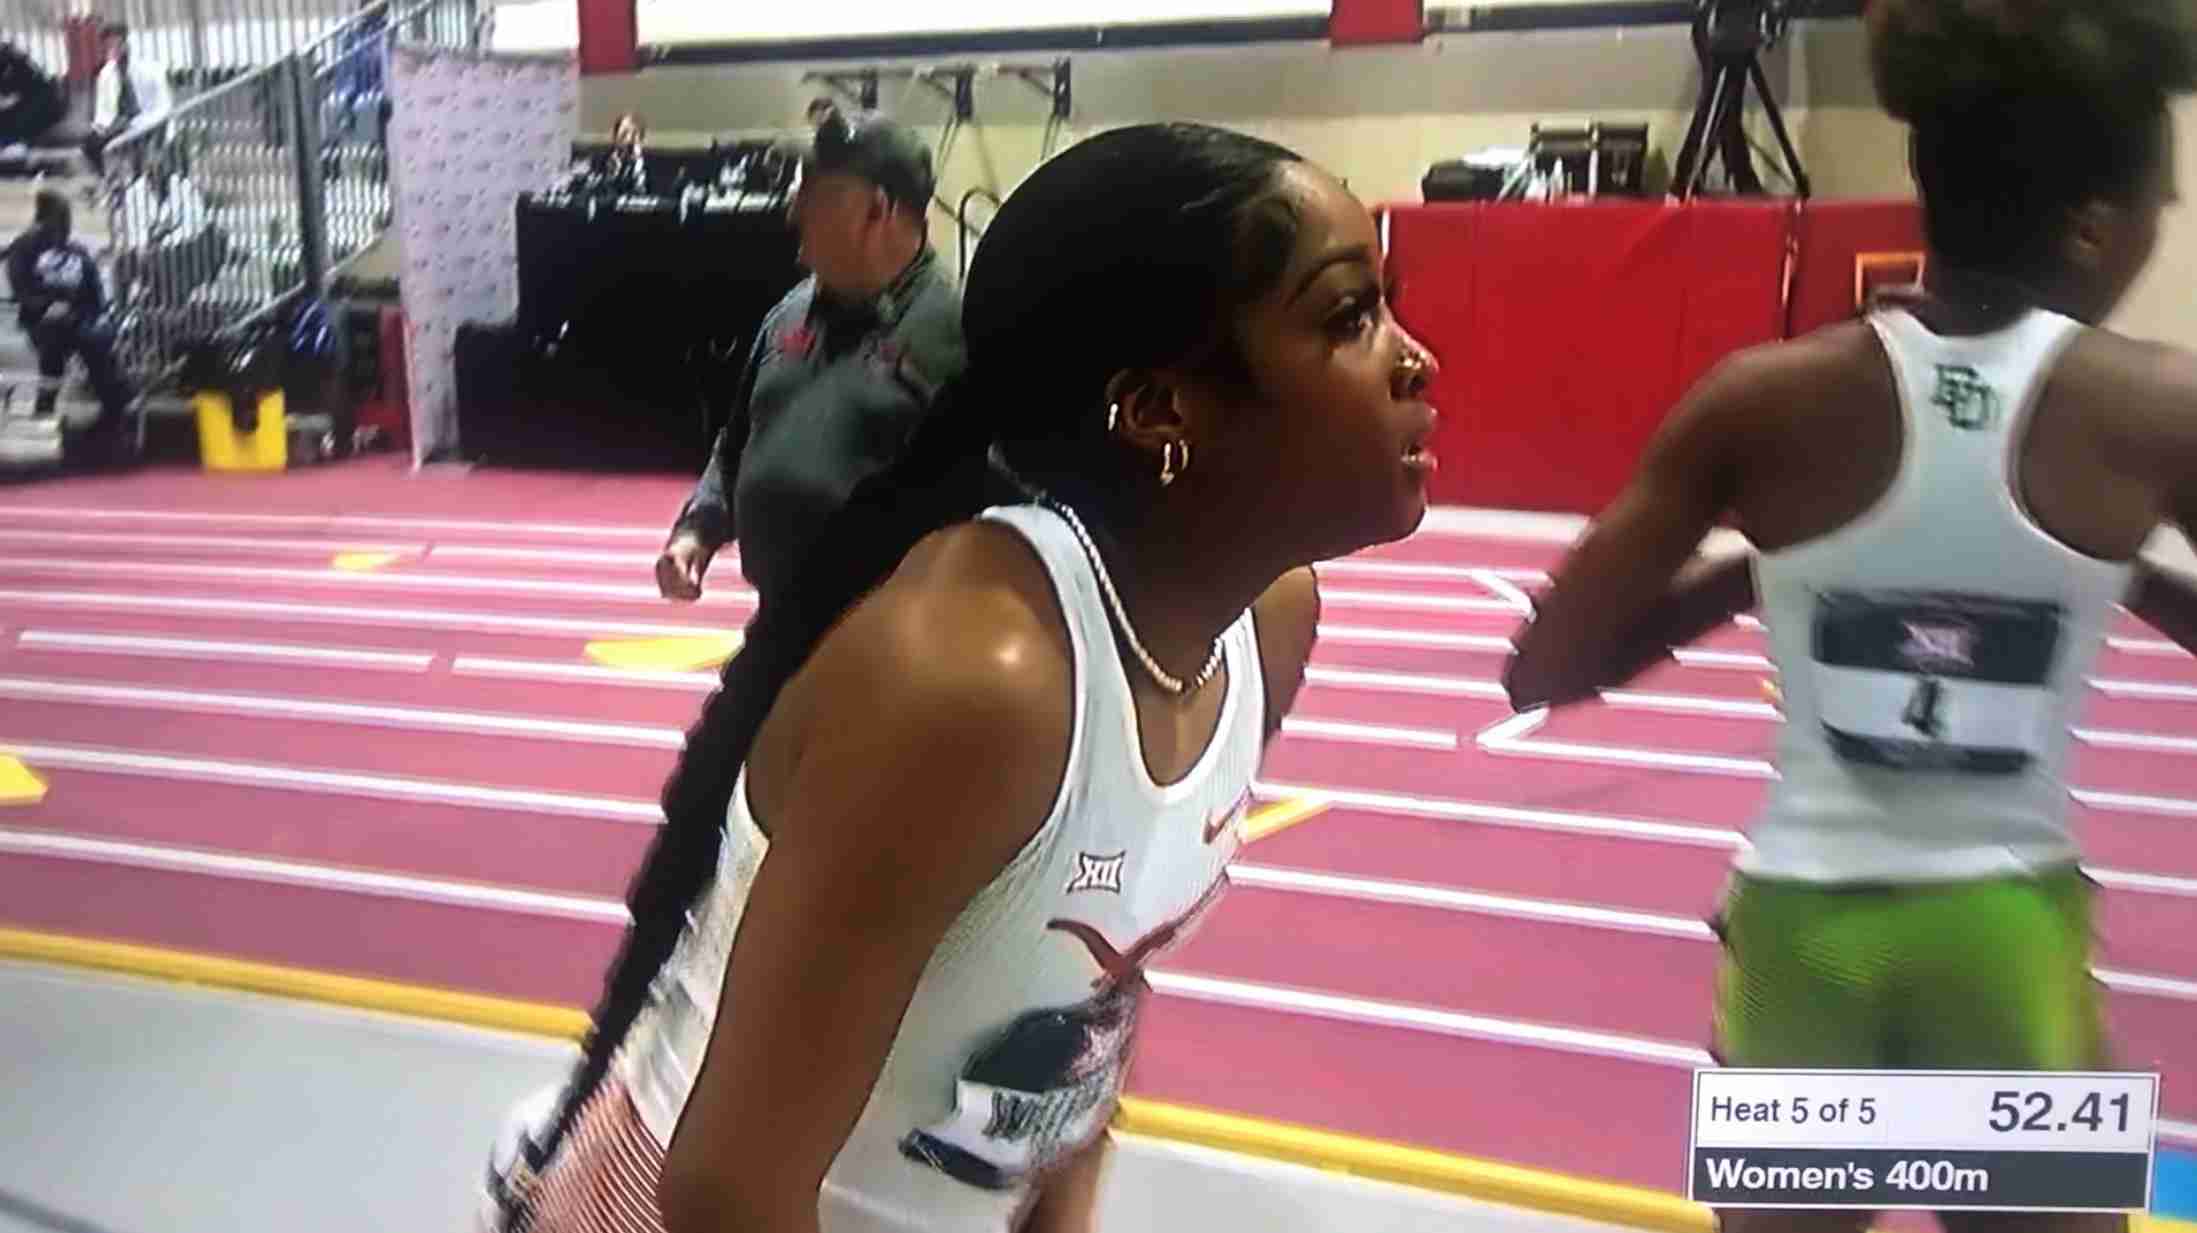 [Video] Stacey-Ann Williams leads 400m qualifiers at 2022 Big 12 Indoor Championships